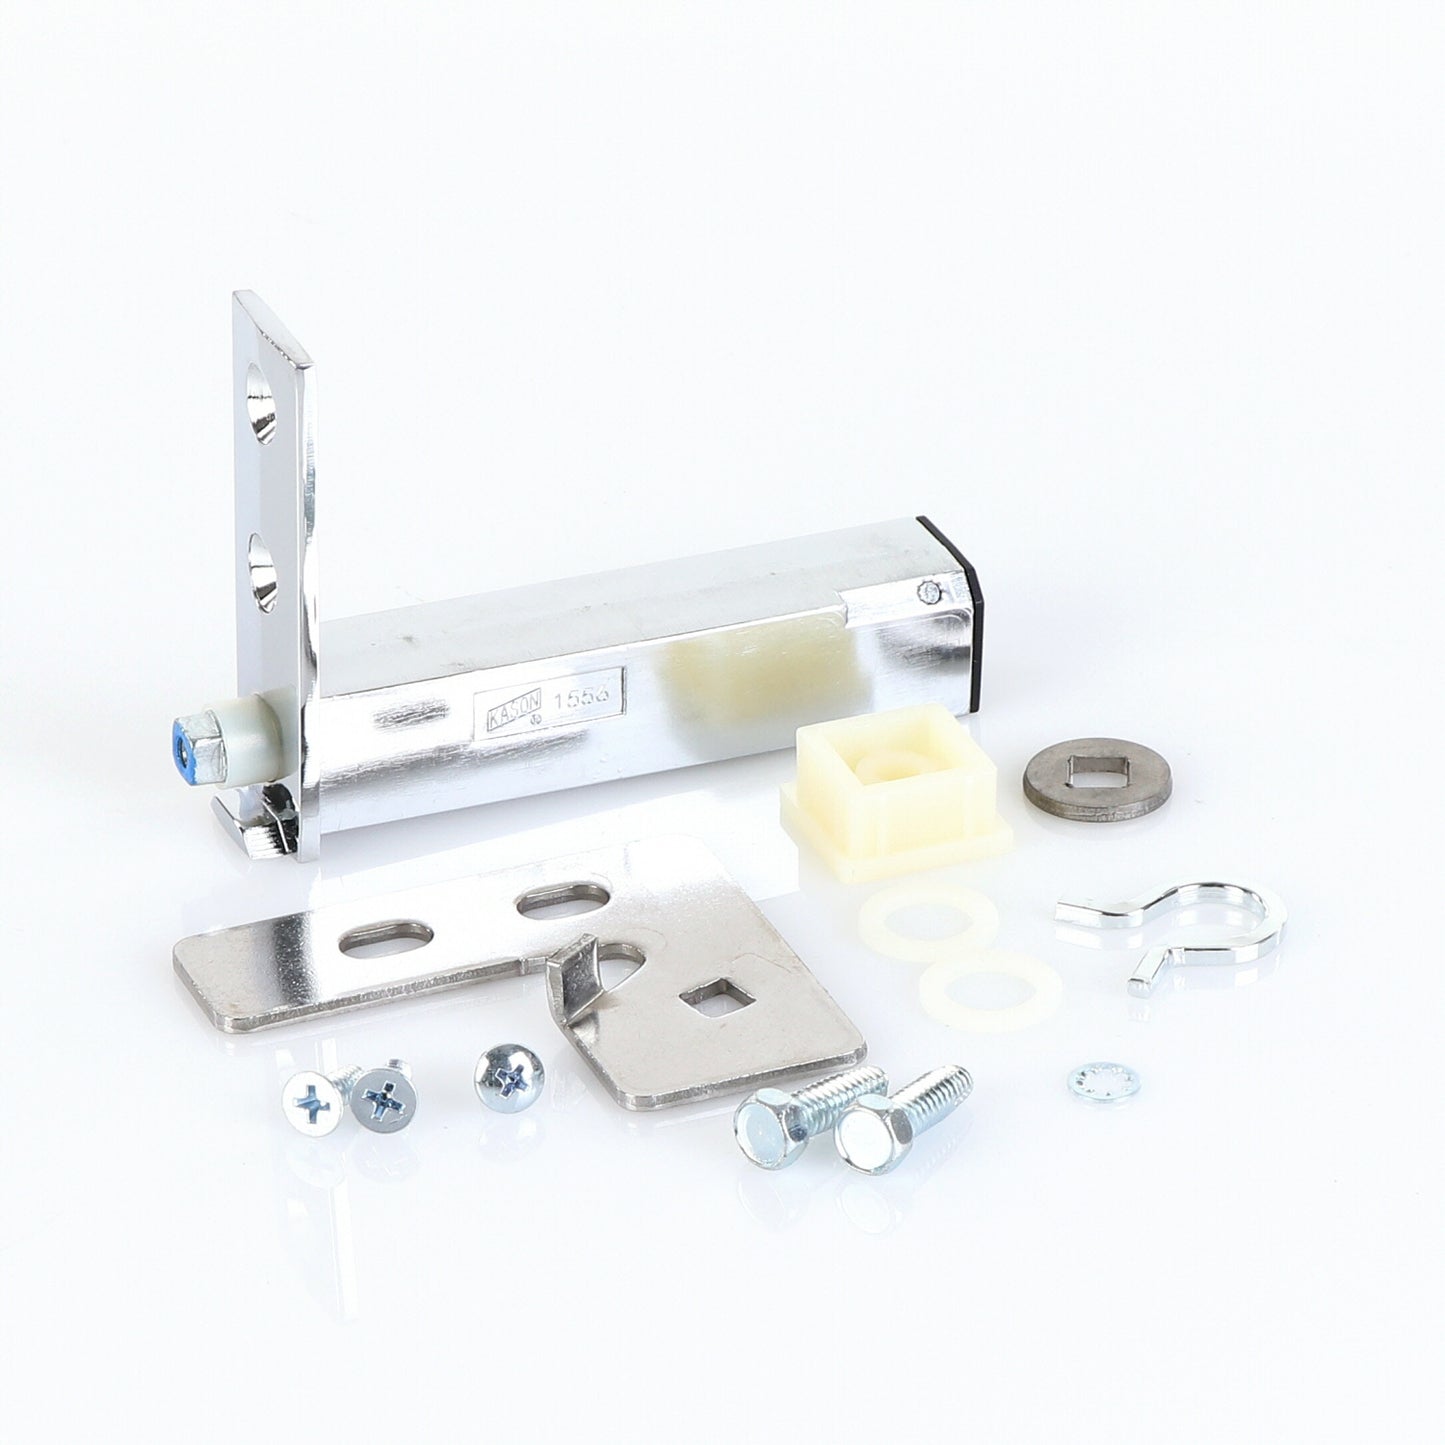 HINGE KIT, DOOR, TOP, RIGHT, CARTRIDGE SPRING WITH 90 DEGREE STAY OPEN FEATURE (SKU - 870837)